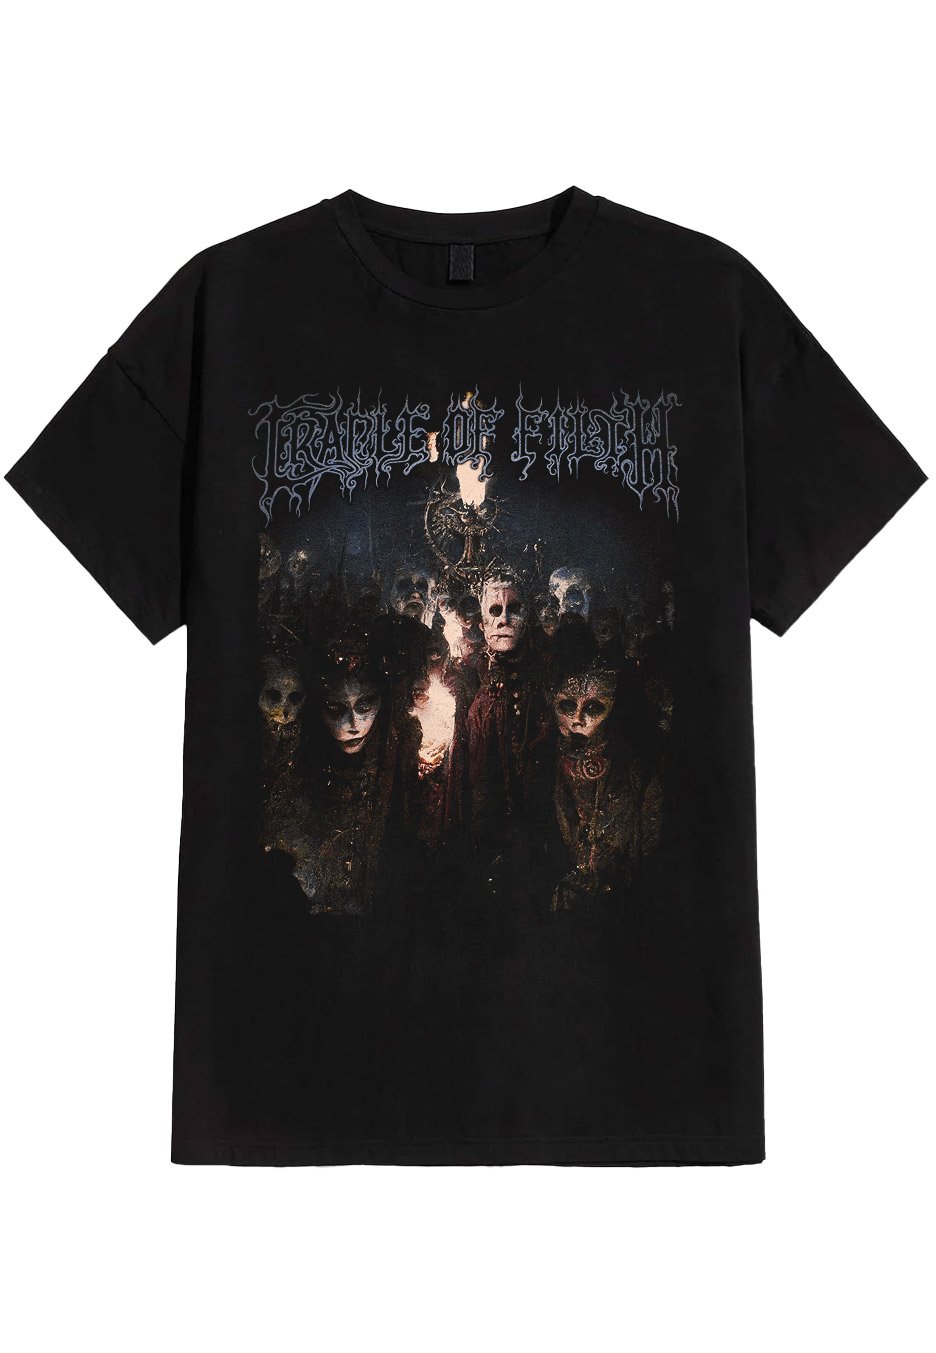 Cradle Of Filth - Trouble And Their Double Lives - T-Shirt